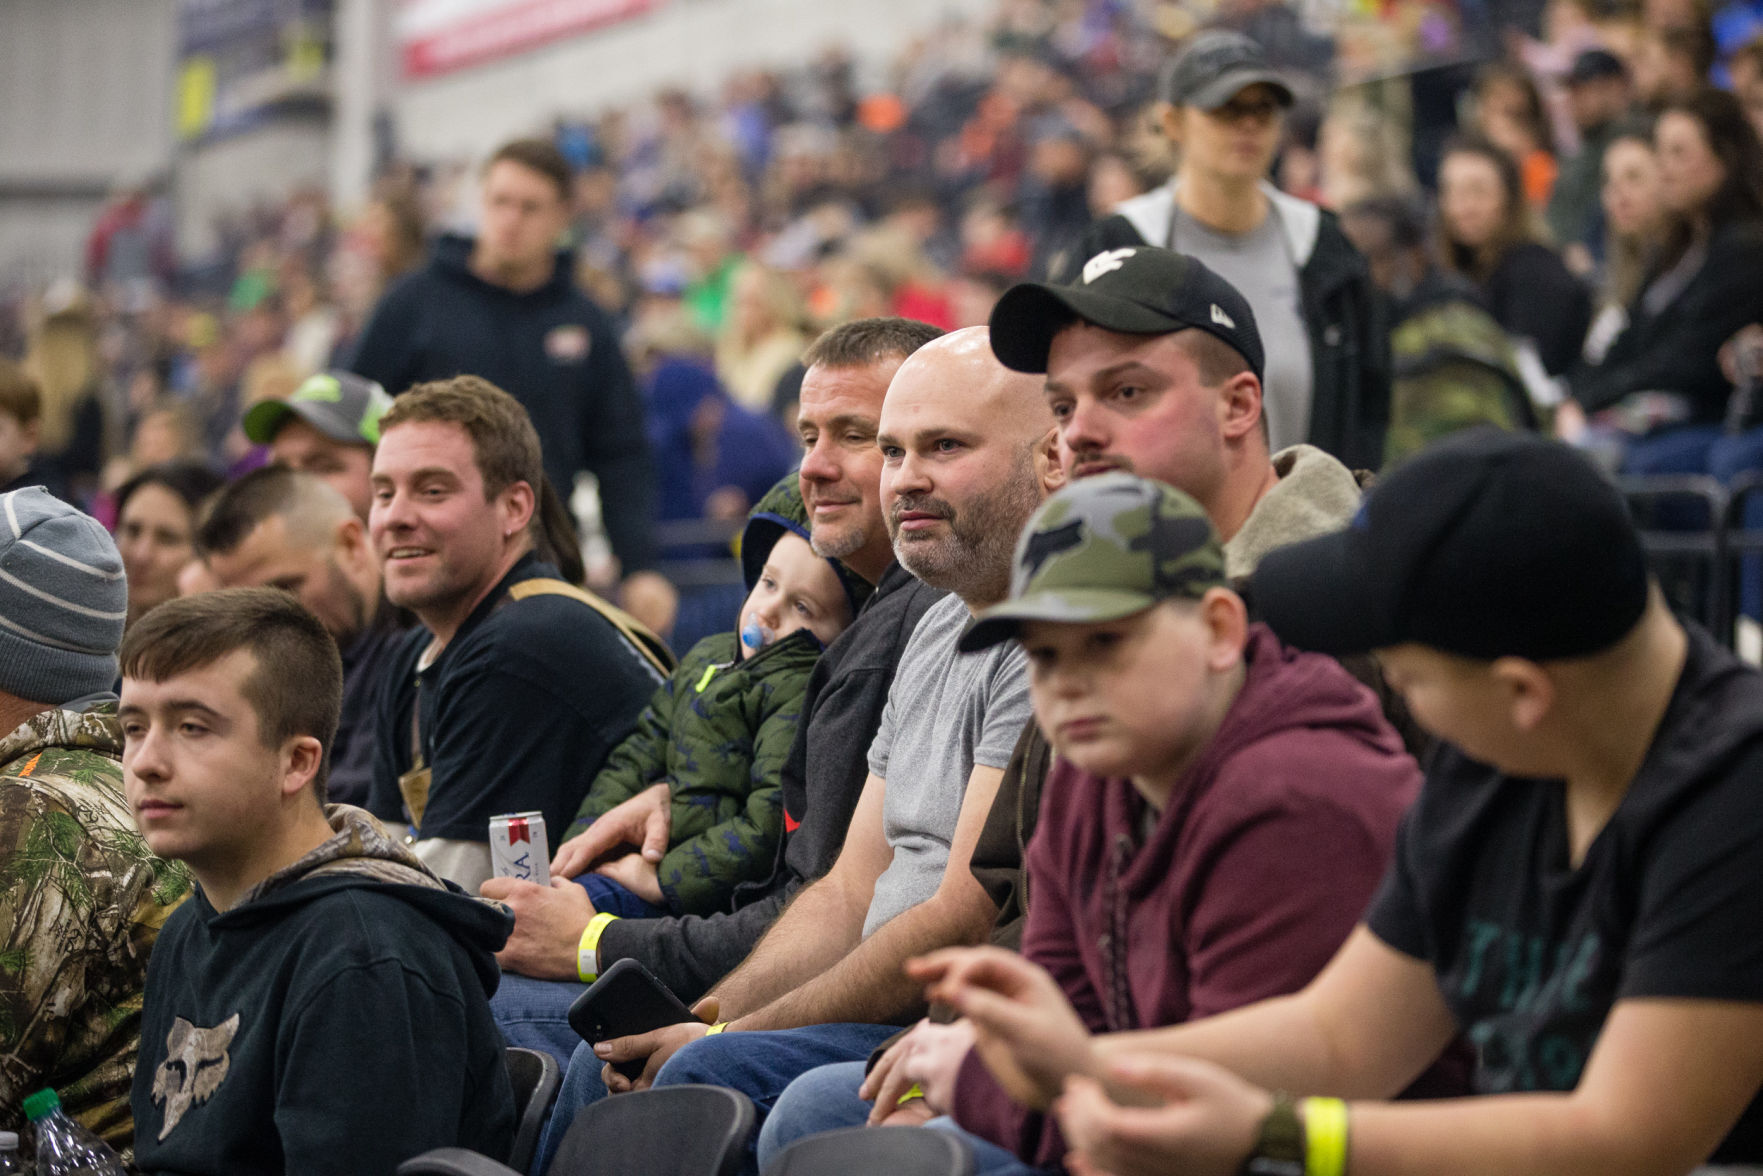 Tri-State ArenaCross returns to Huntington for weekend of racing, dirt Features/Entertainment herald-dispatch pic